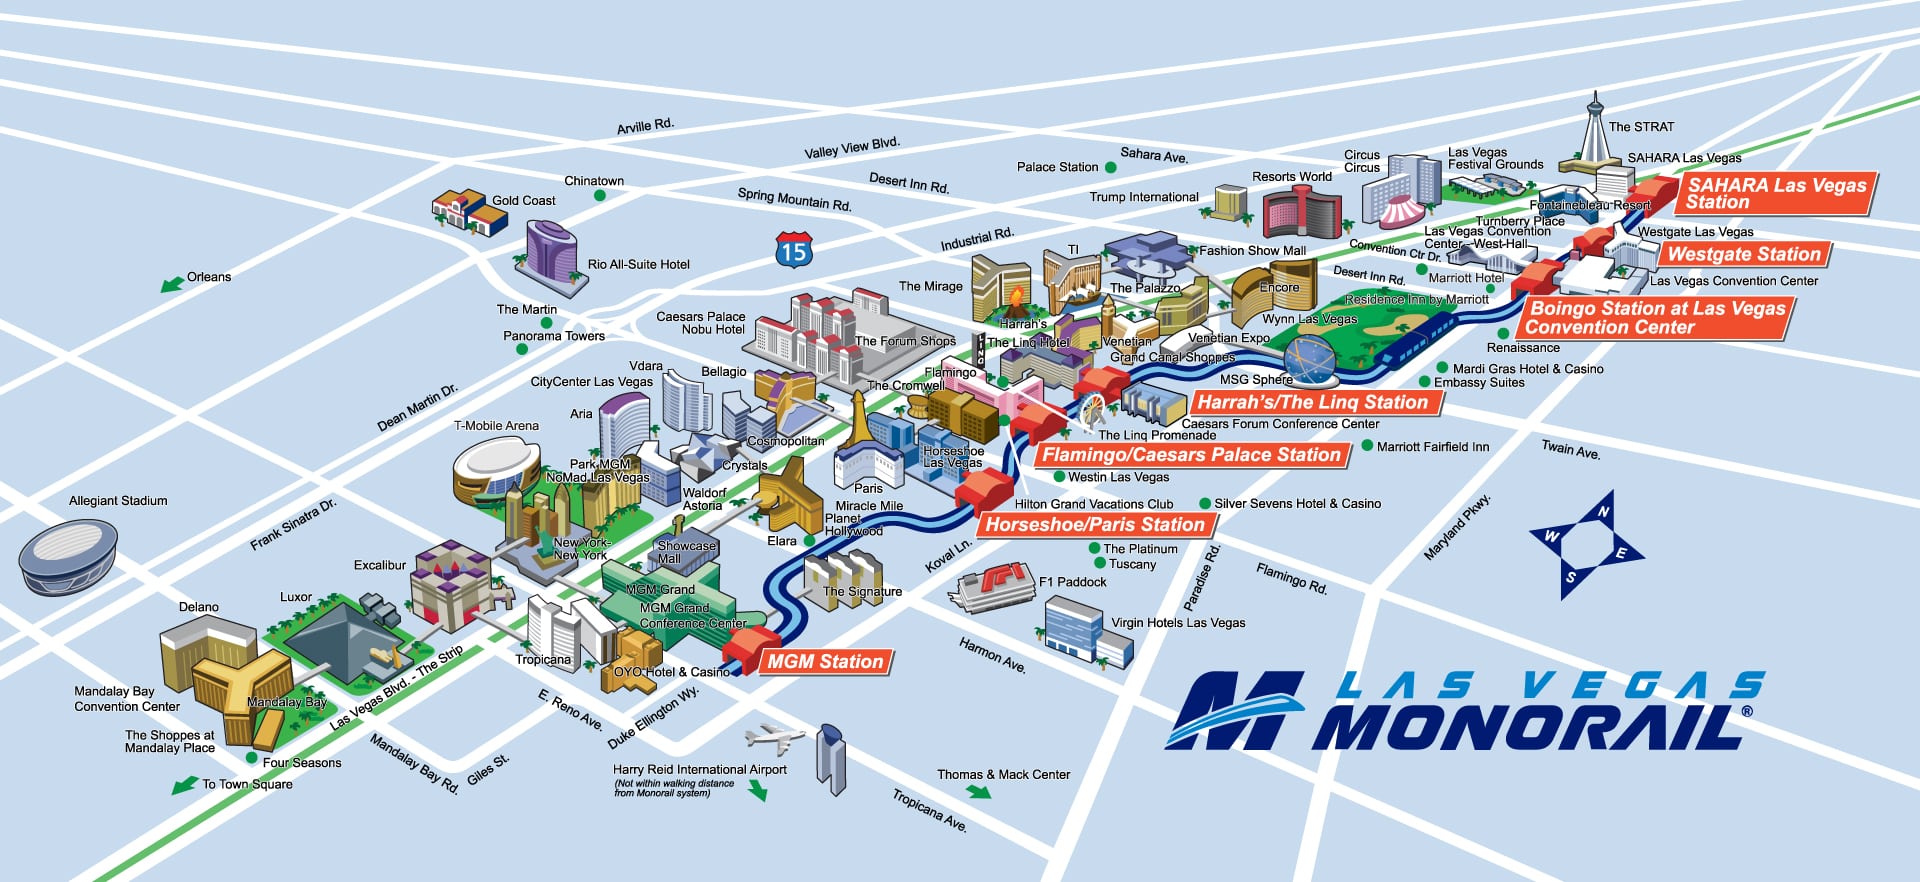 Route Map Of The Las Vegas Monorail